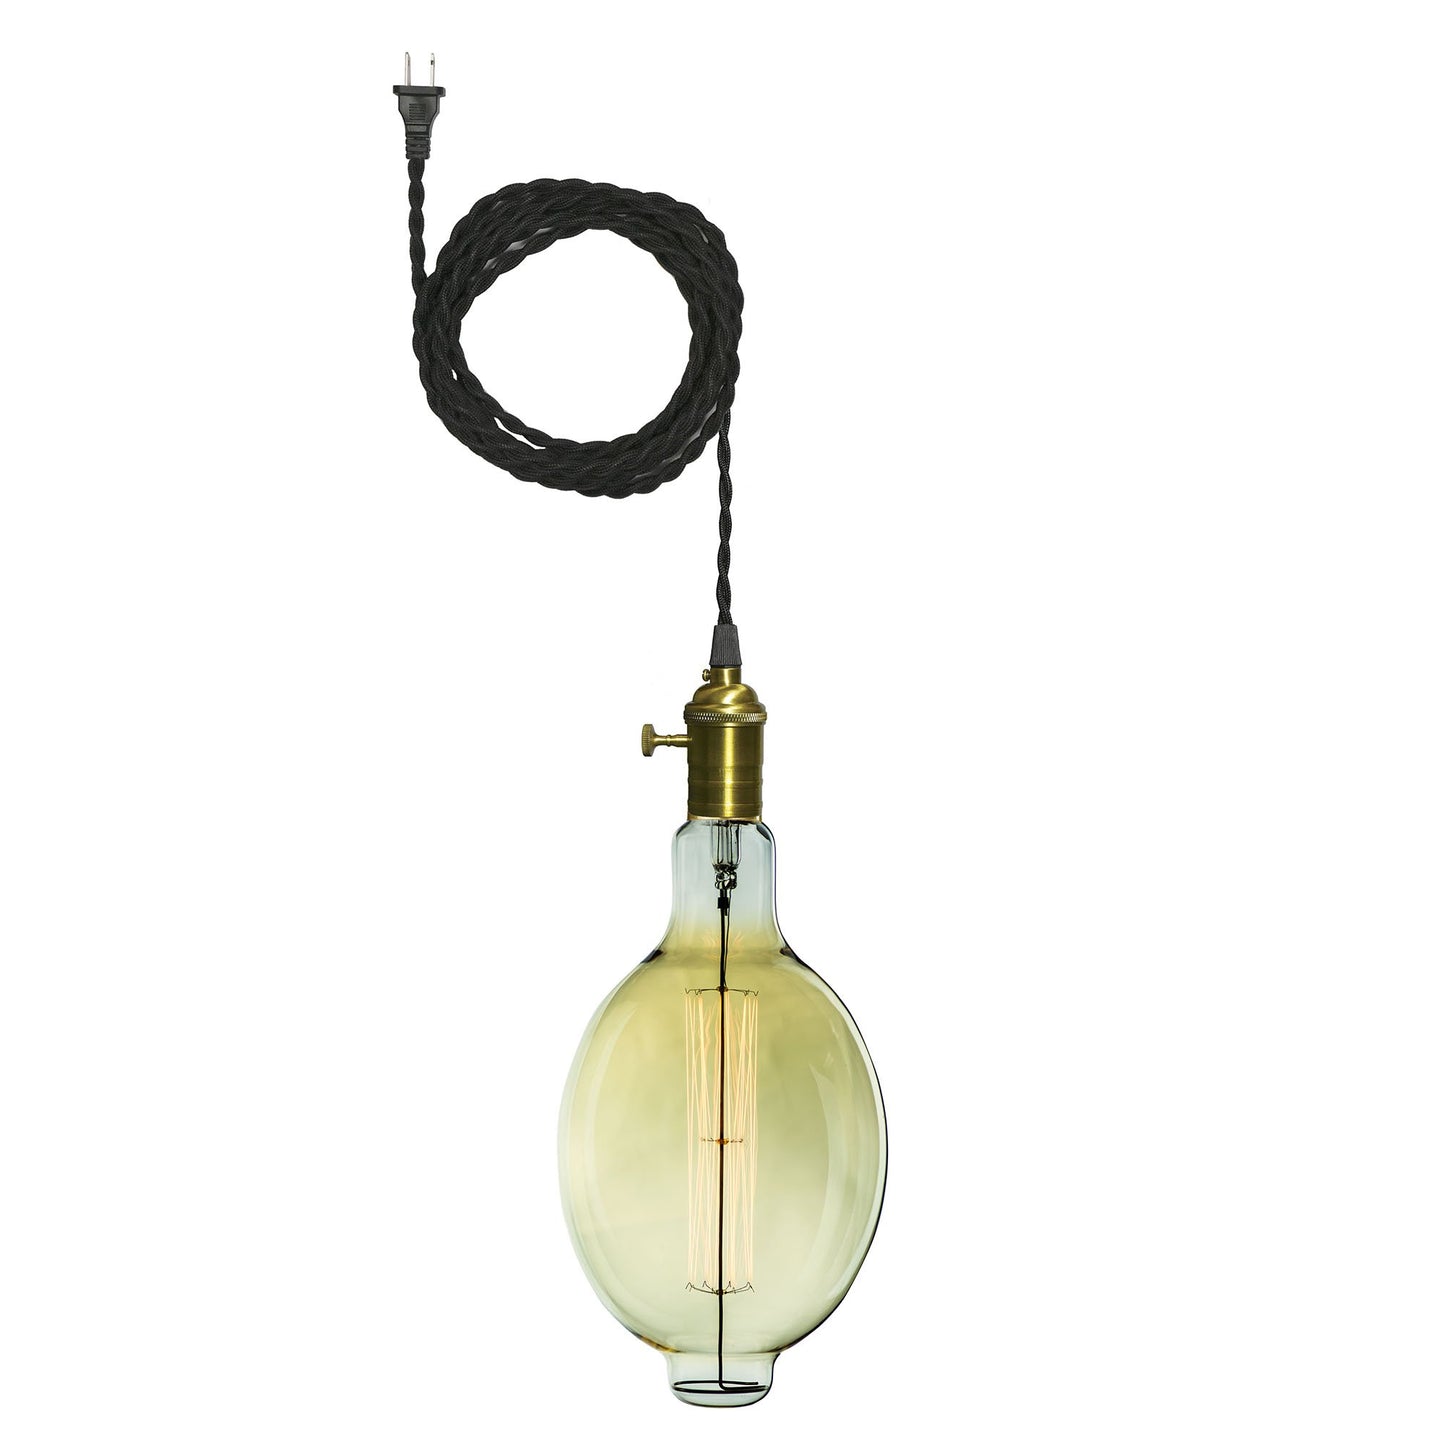 BULBRITE FIXTURES PLUG IN PENDANT KIT VINTAGE BRONZE SOCKET WITH BLACK CORD AND INCANDESCENT BT56 MEDIUM SCREW (E26) 60W NON-DIMMABLE ANTIQUE LIGHT BULB 2200K/AMBER 1PK (810013)